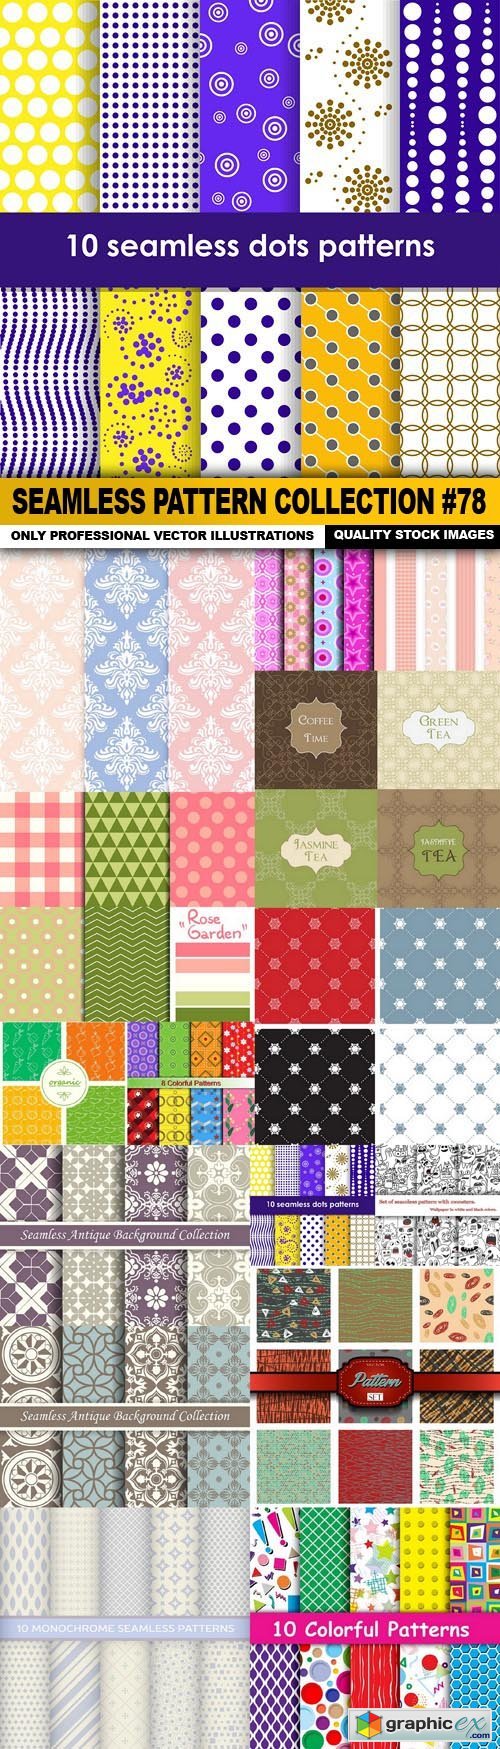 Seamless Pattern Collection #78